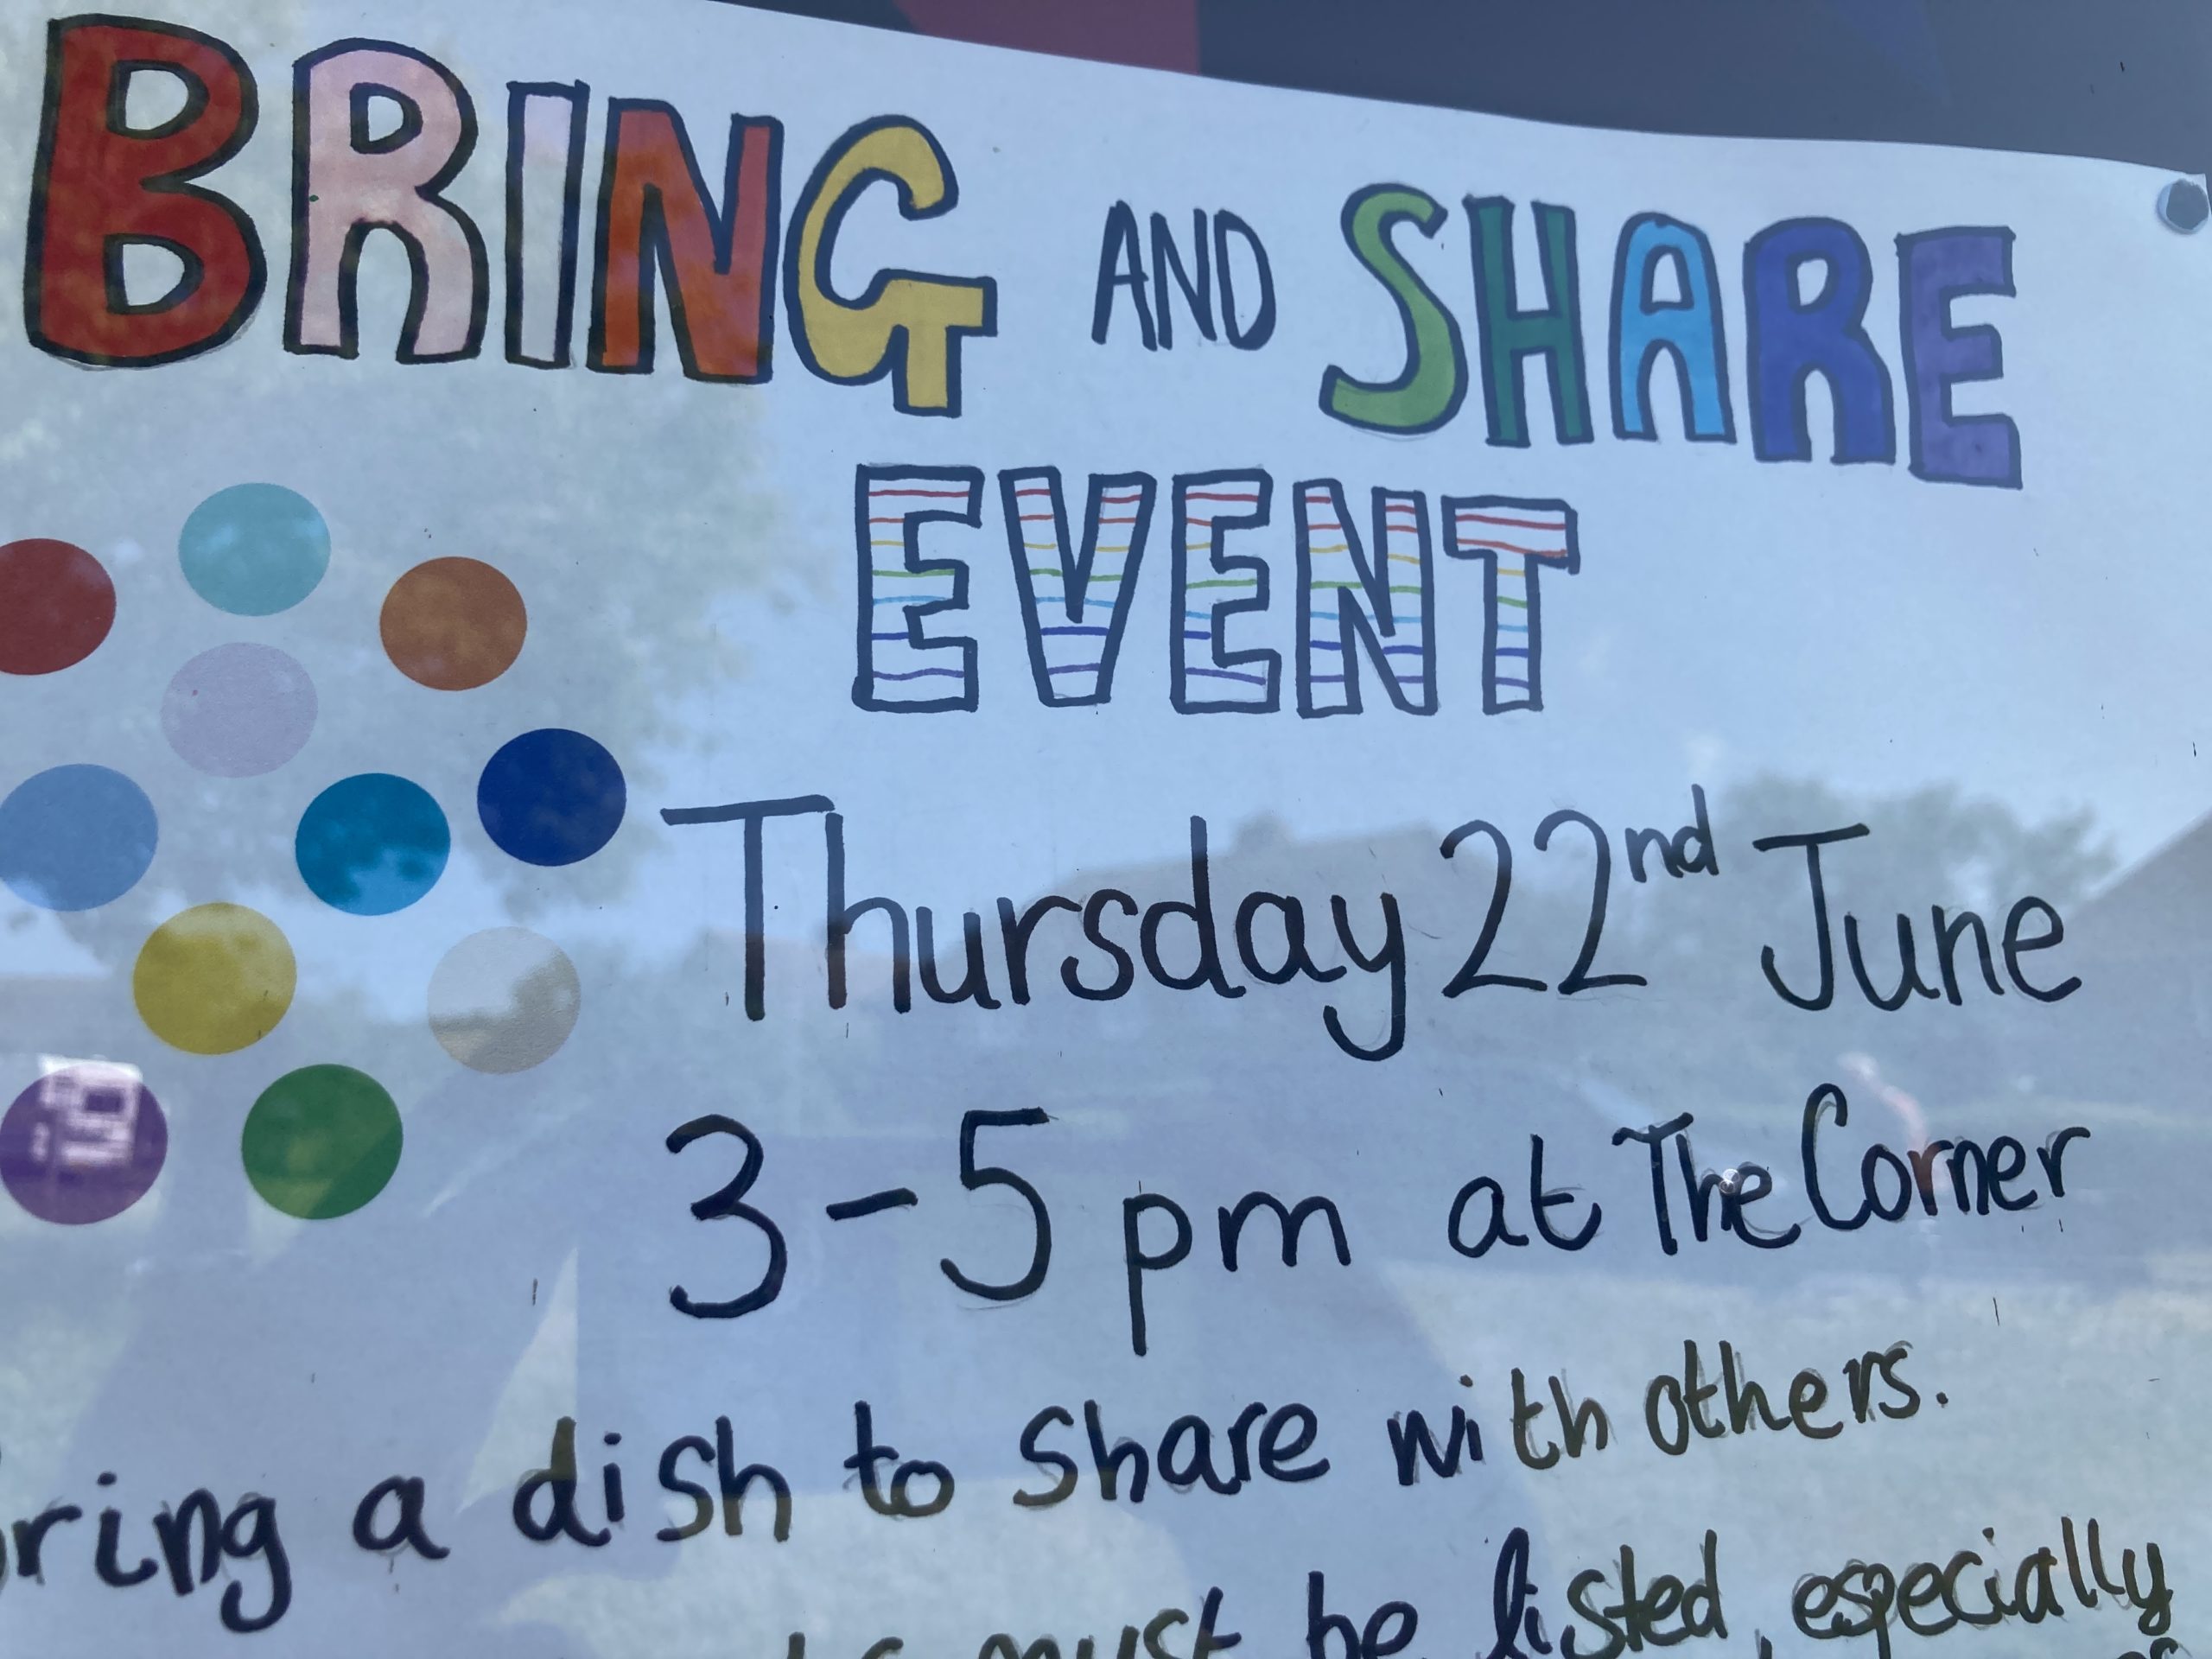 Bring and Share a dish for refugee week